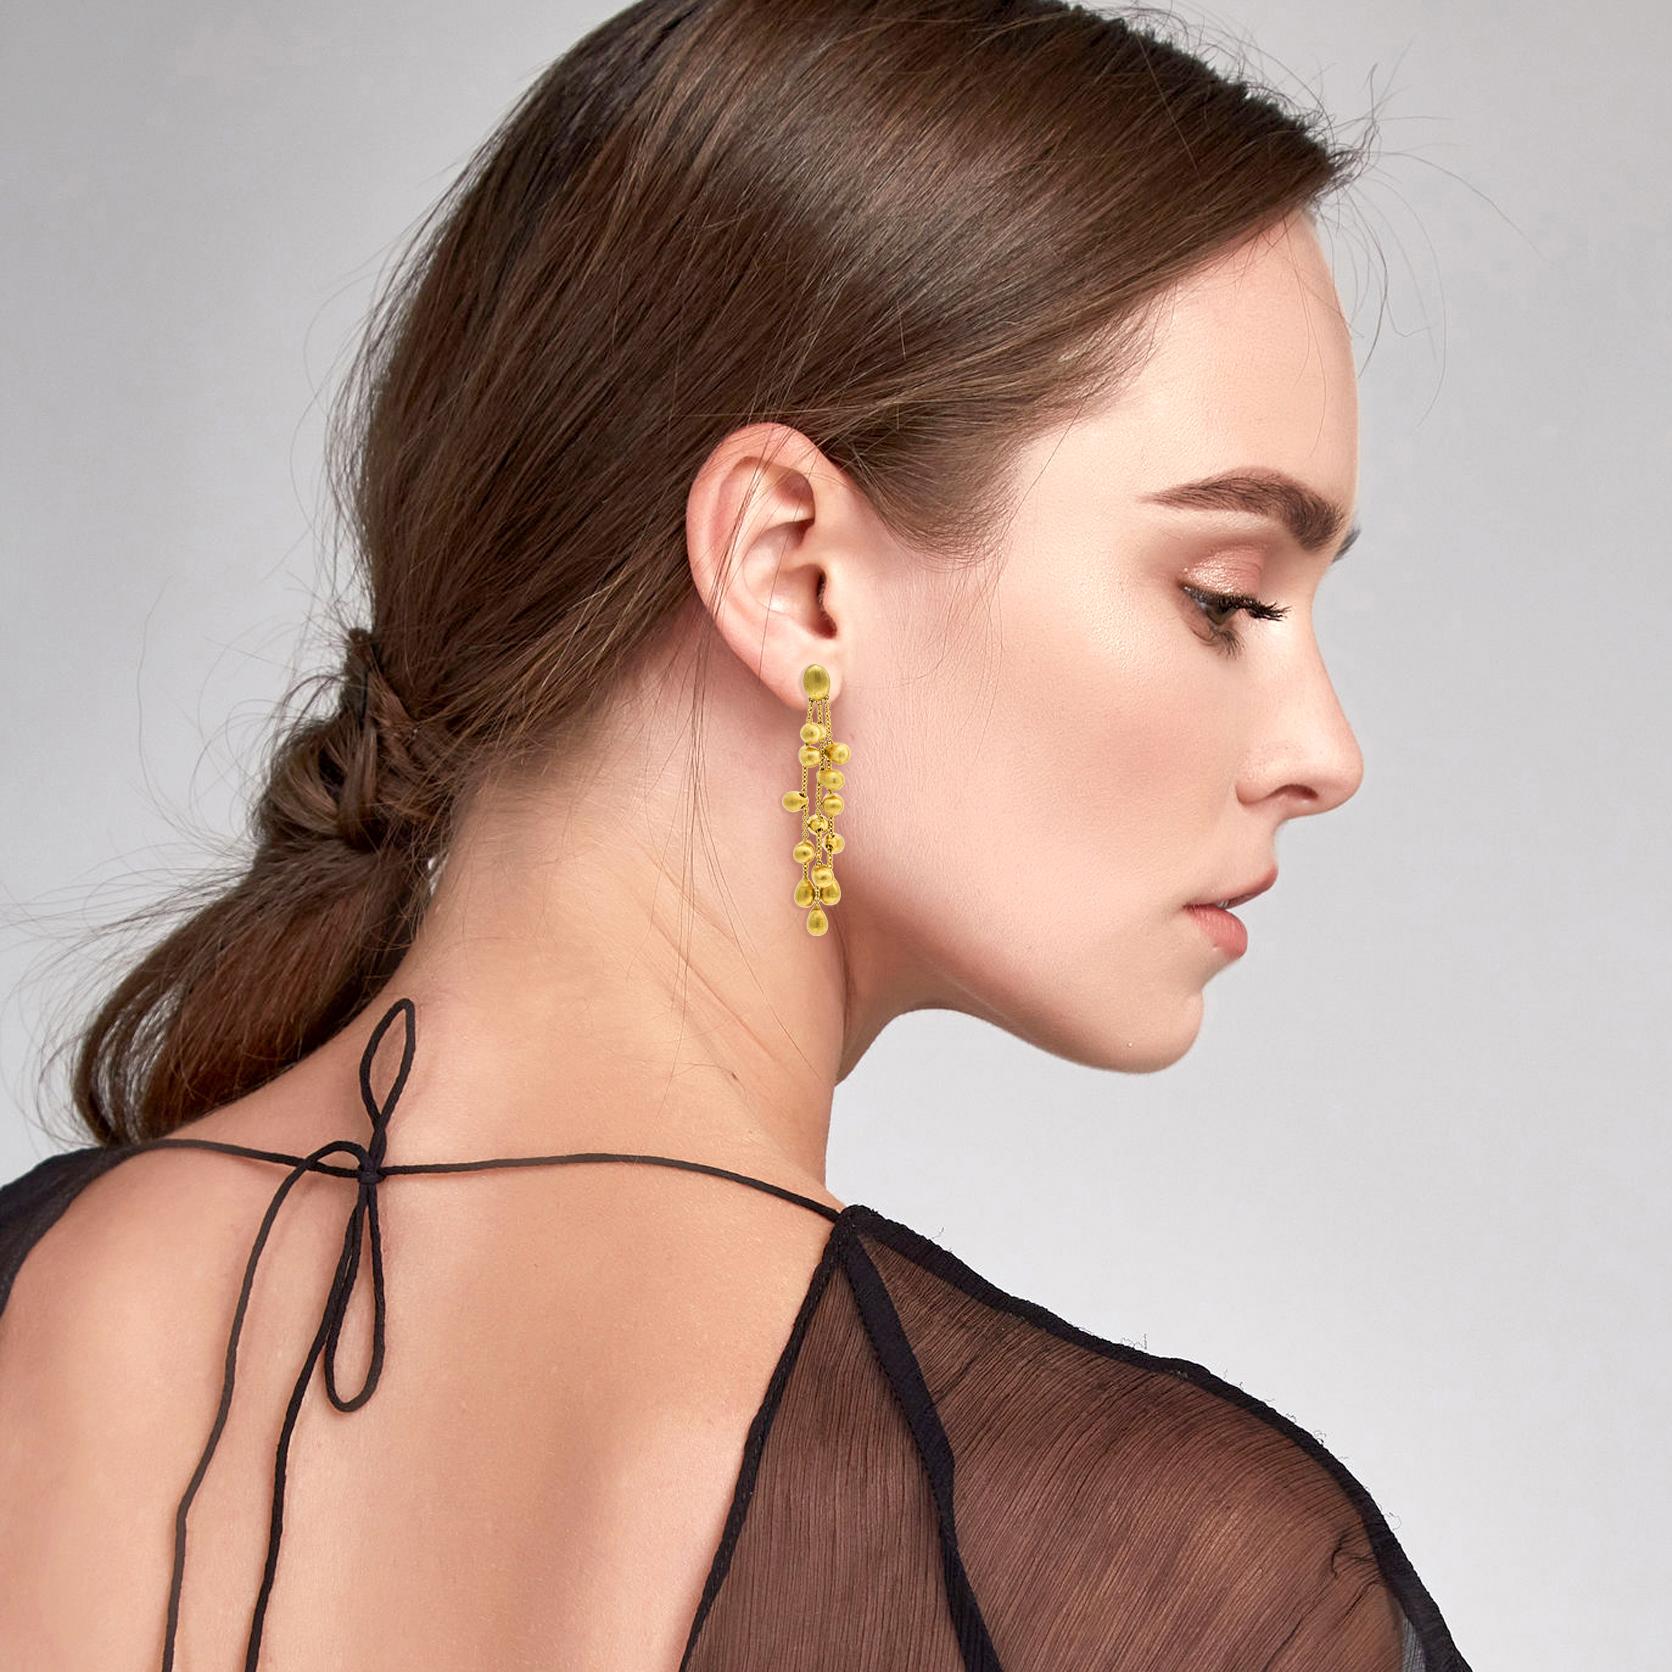 Marco Bicego textured gold beads dangle earrings in 18-karat yellow gold. Butterfly backs. Made in Italy.